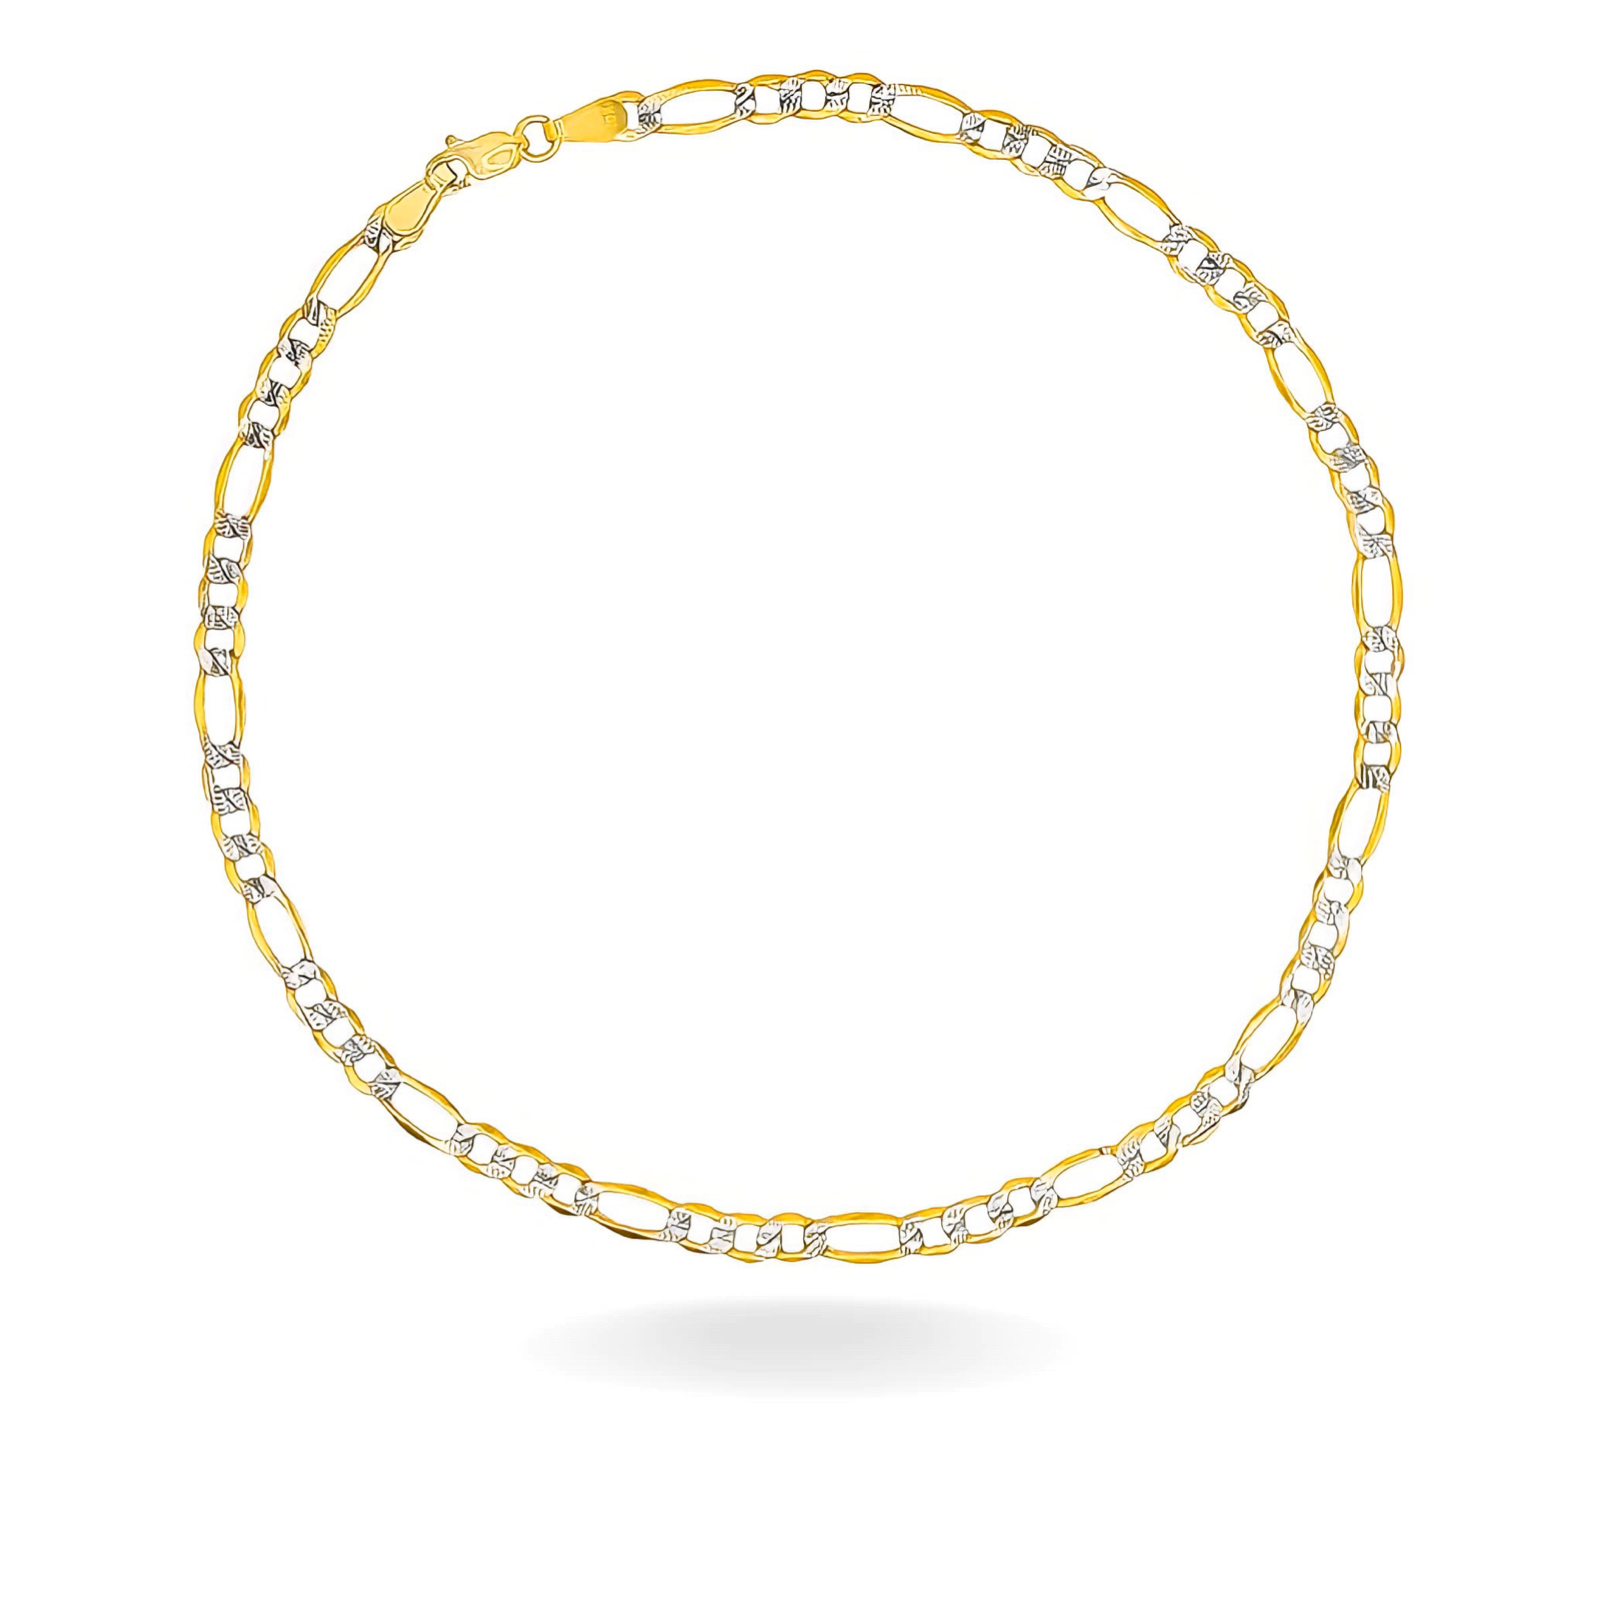 10K TWO TONED GOLD FIGARO ANKLET -3.5MM